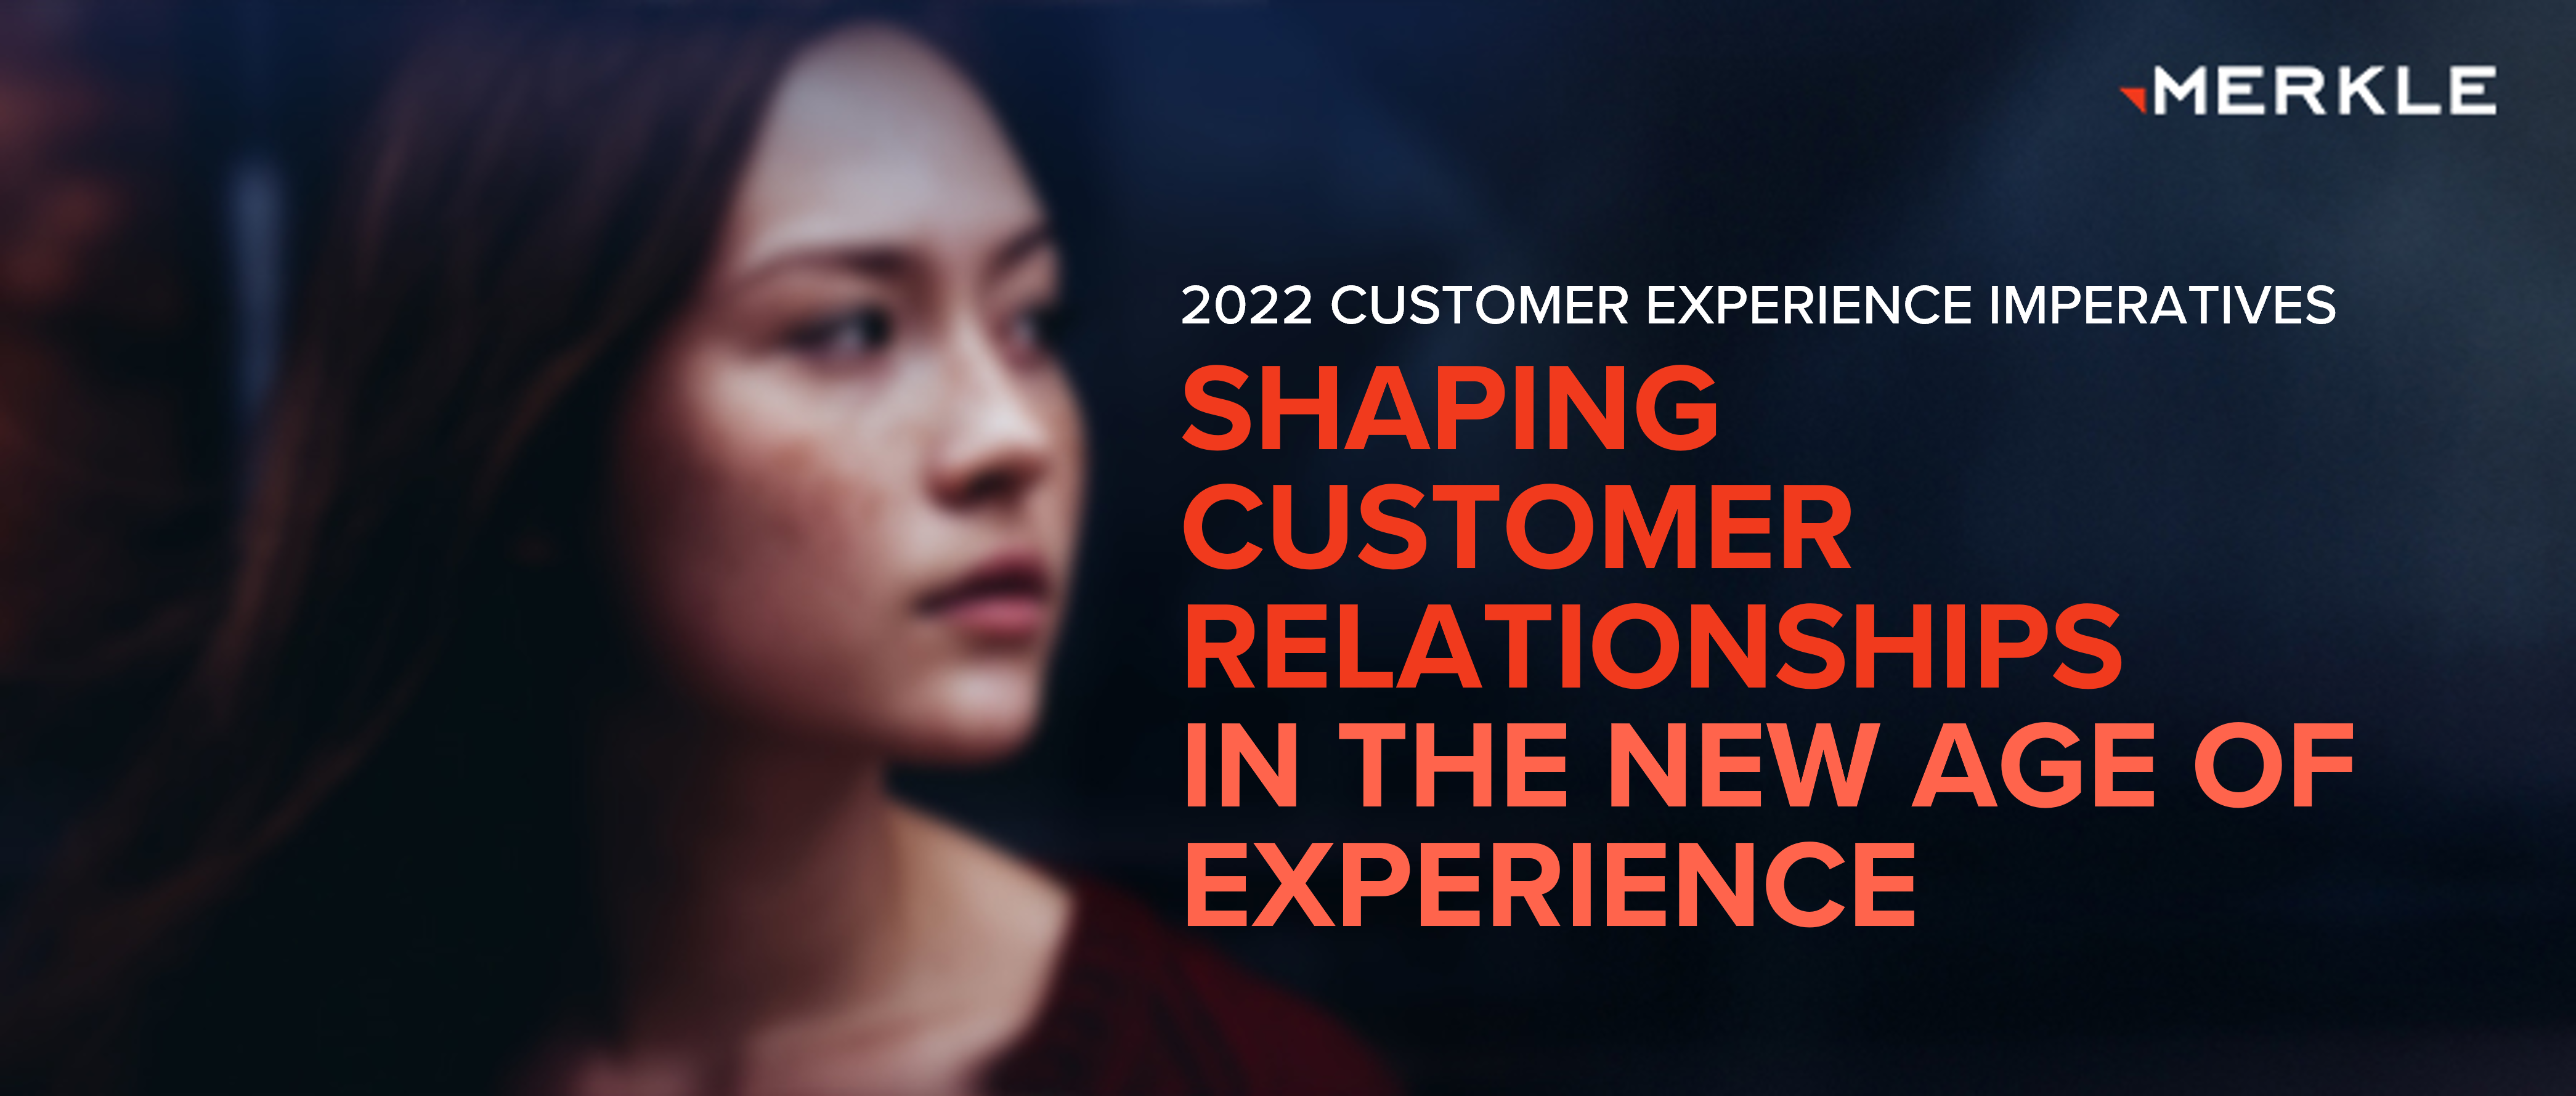 2022 Customer Experience Imperatives